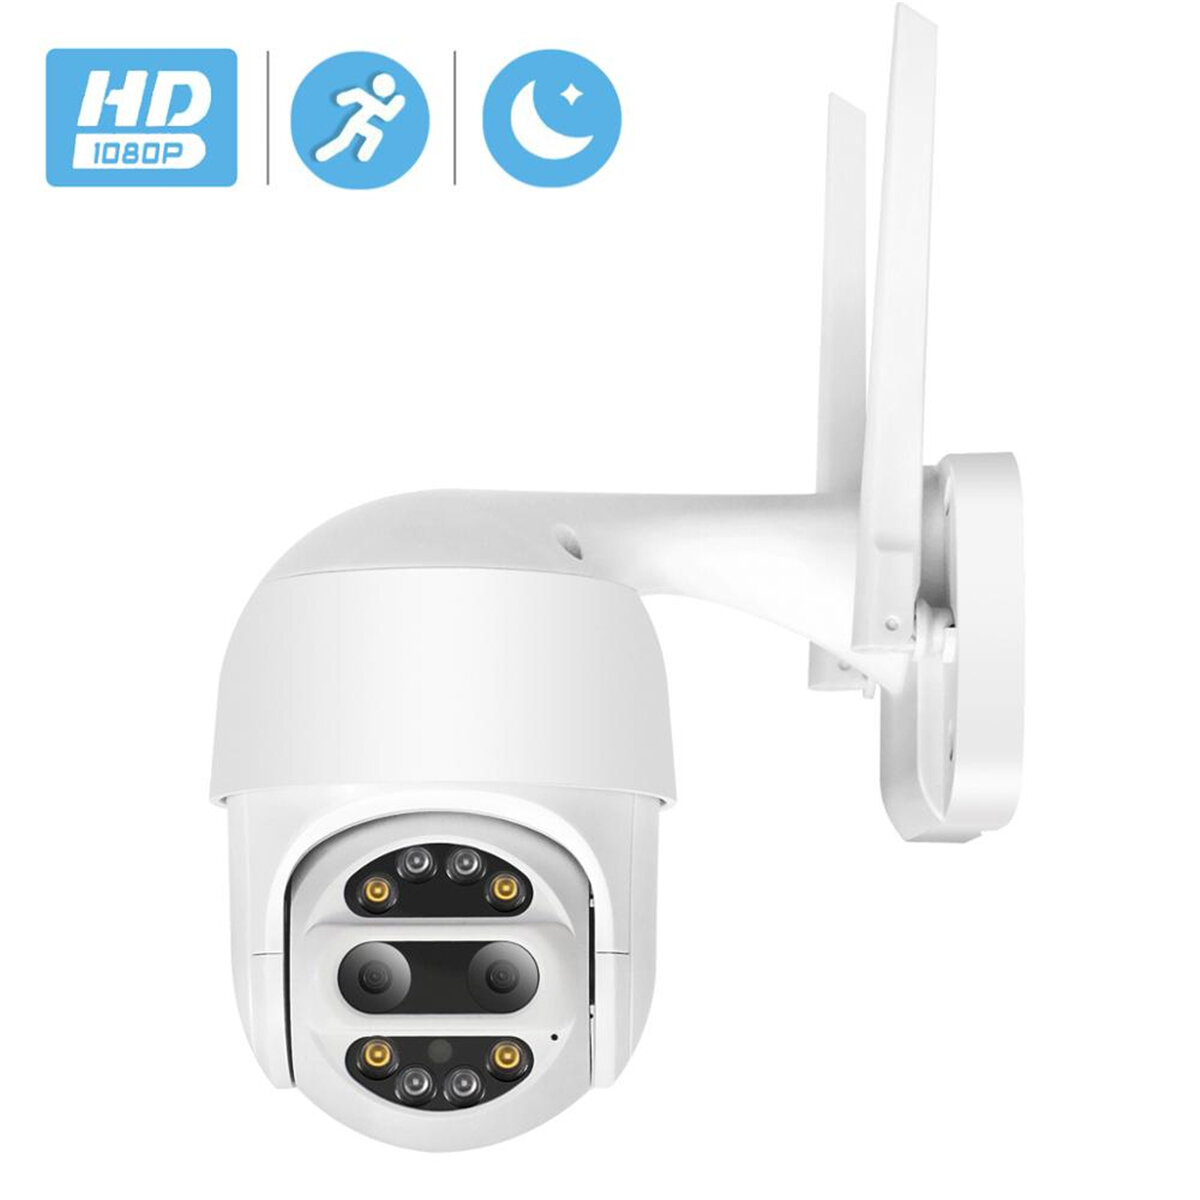 

BESDER 1080P HD PTZ IP Camera Wifi Outdoor Auto Tracking 2MP CCTV Security Camera 4X Optical Zoom Alarm Dome Waterproof